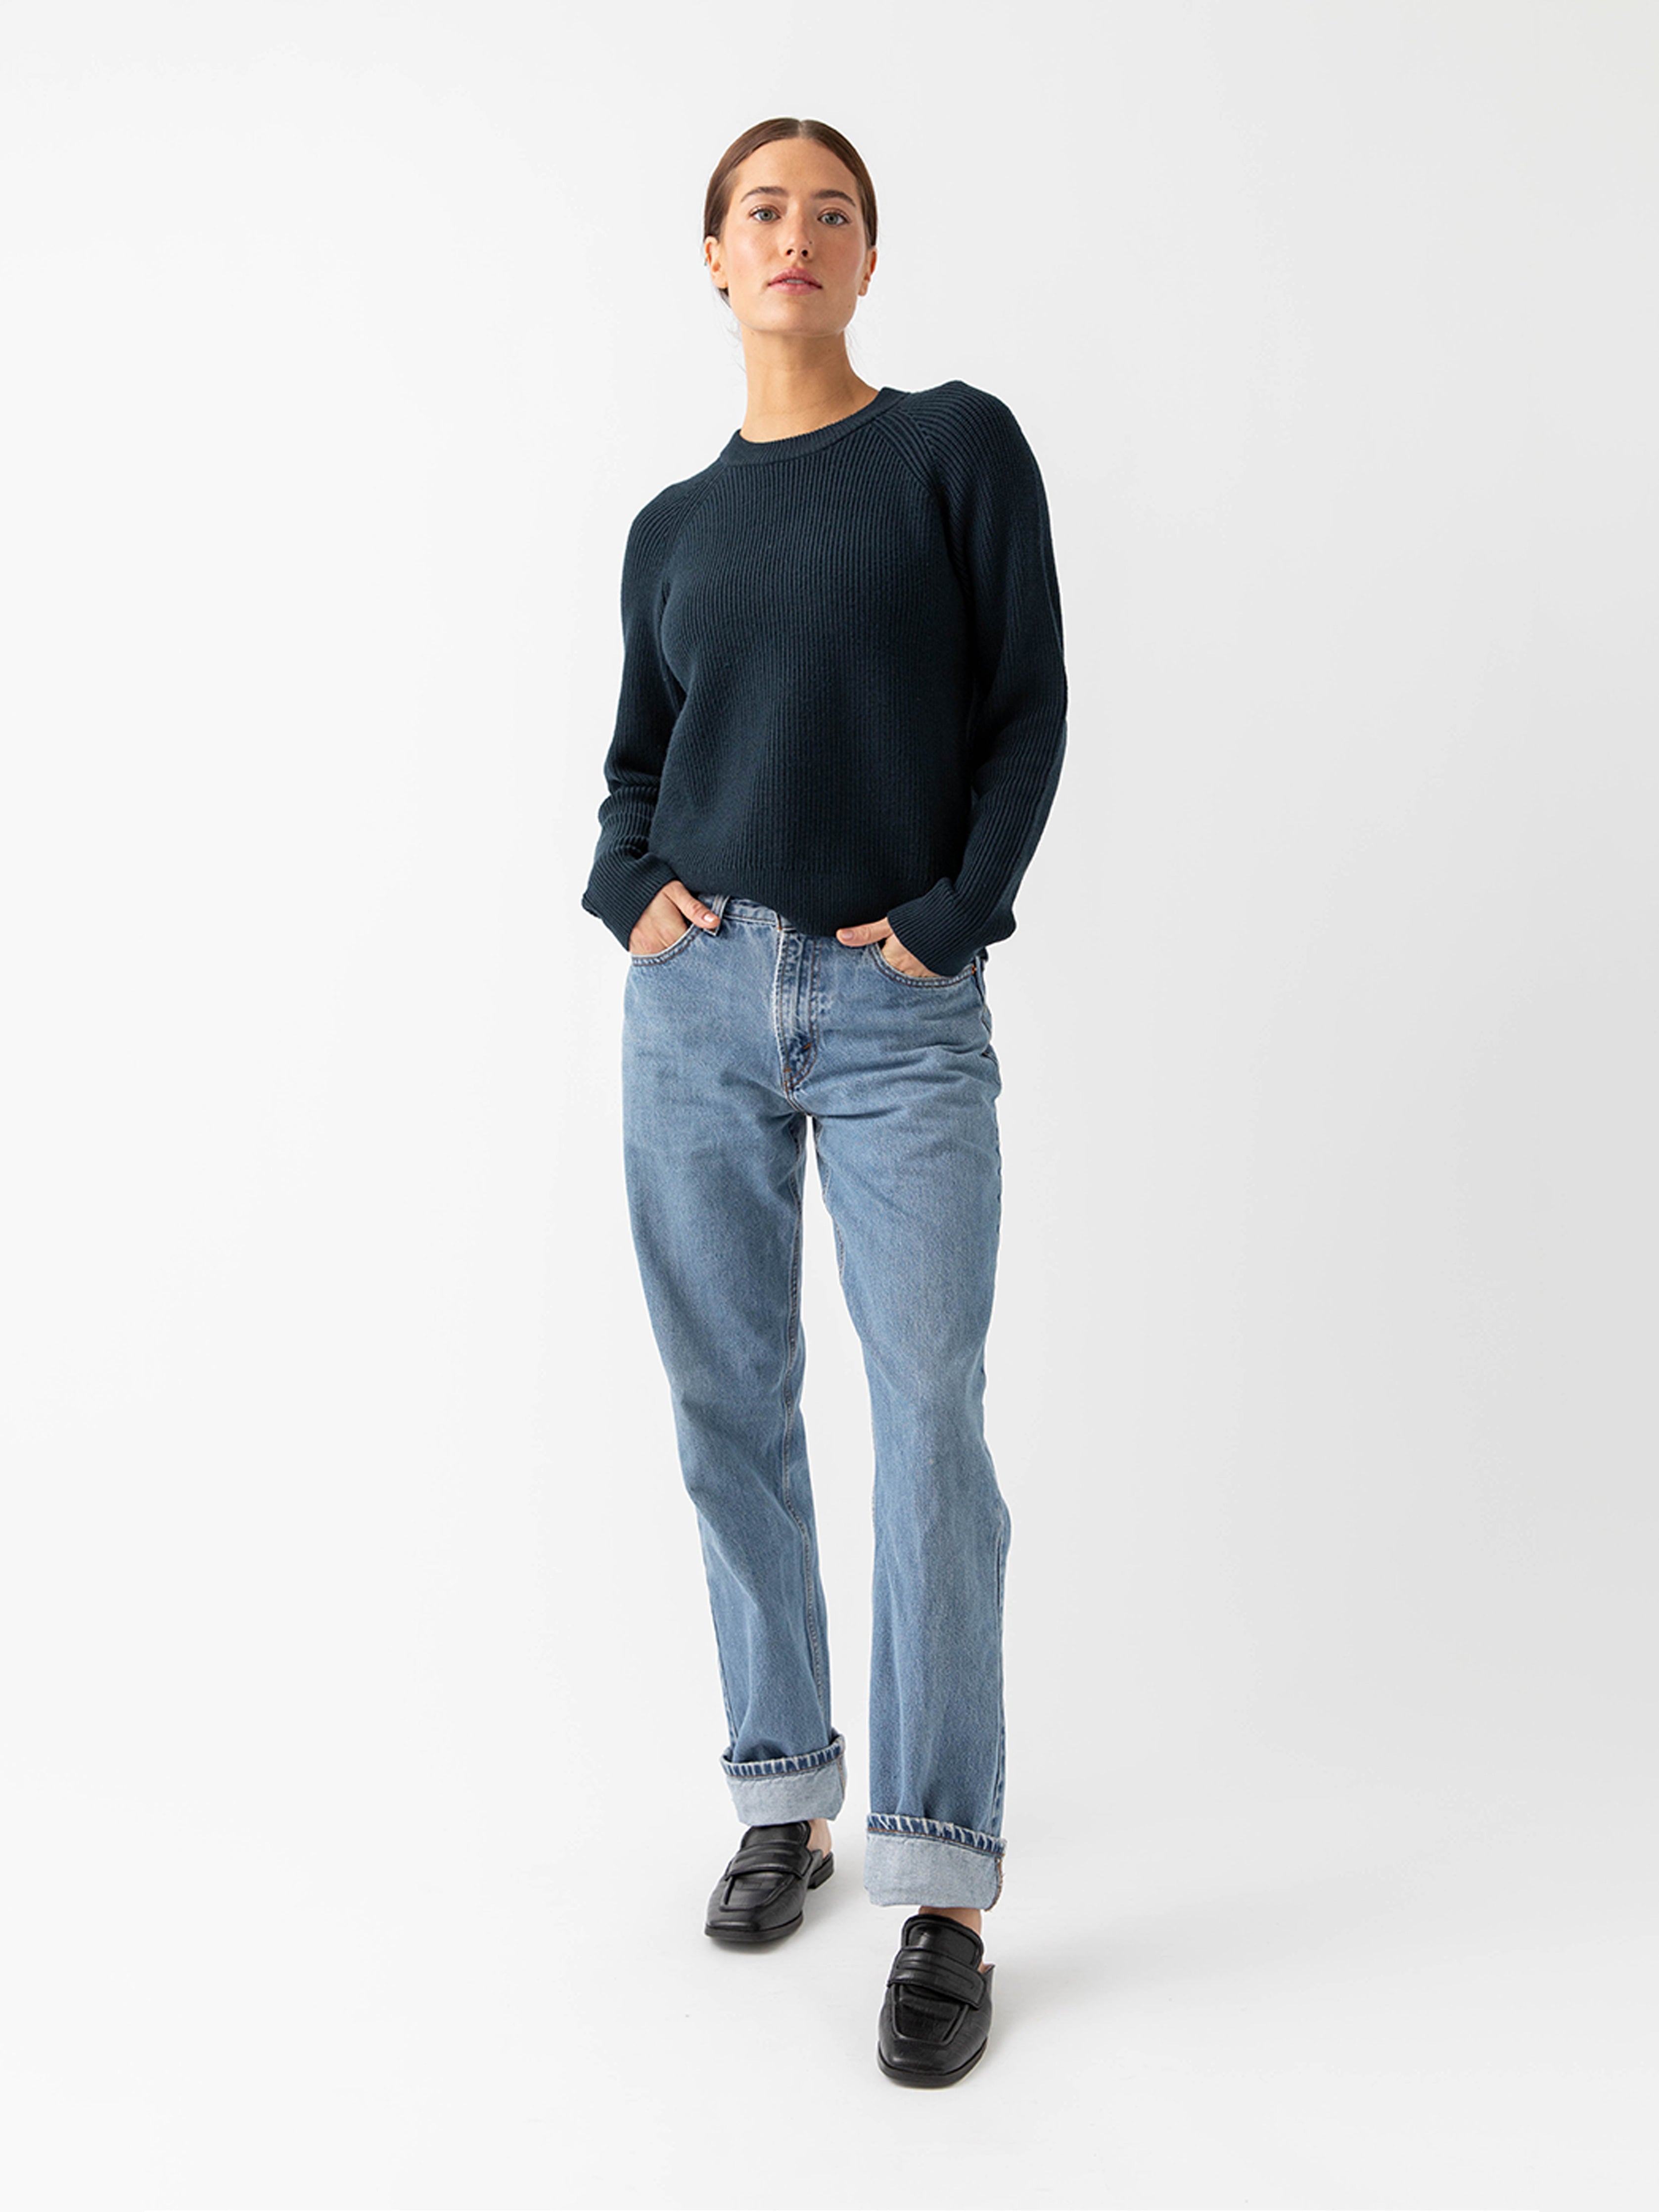 Woman wearing eclipse classic crewneck and jeans with white background |Color:Eclipse